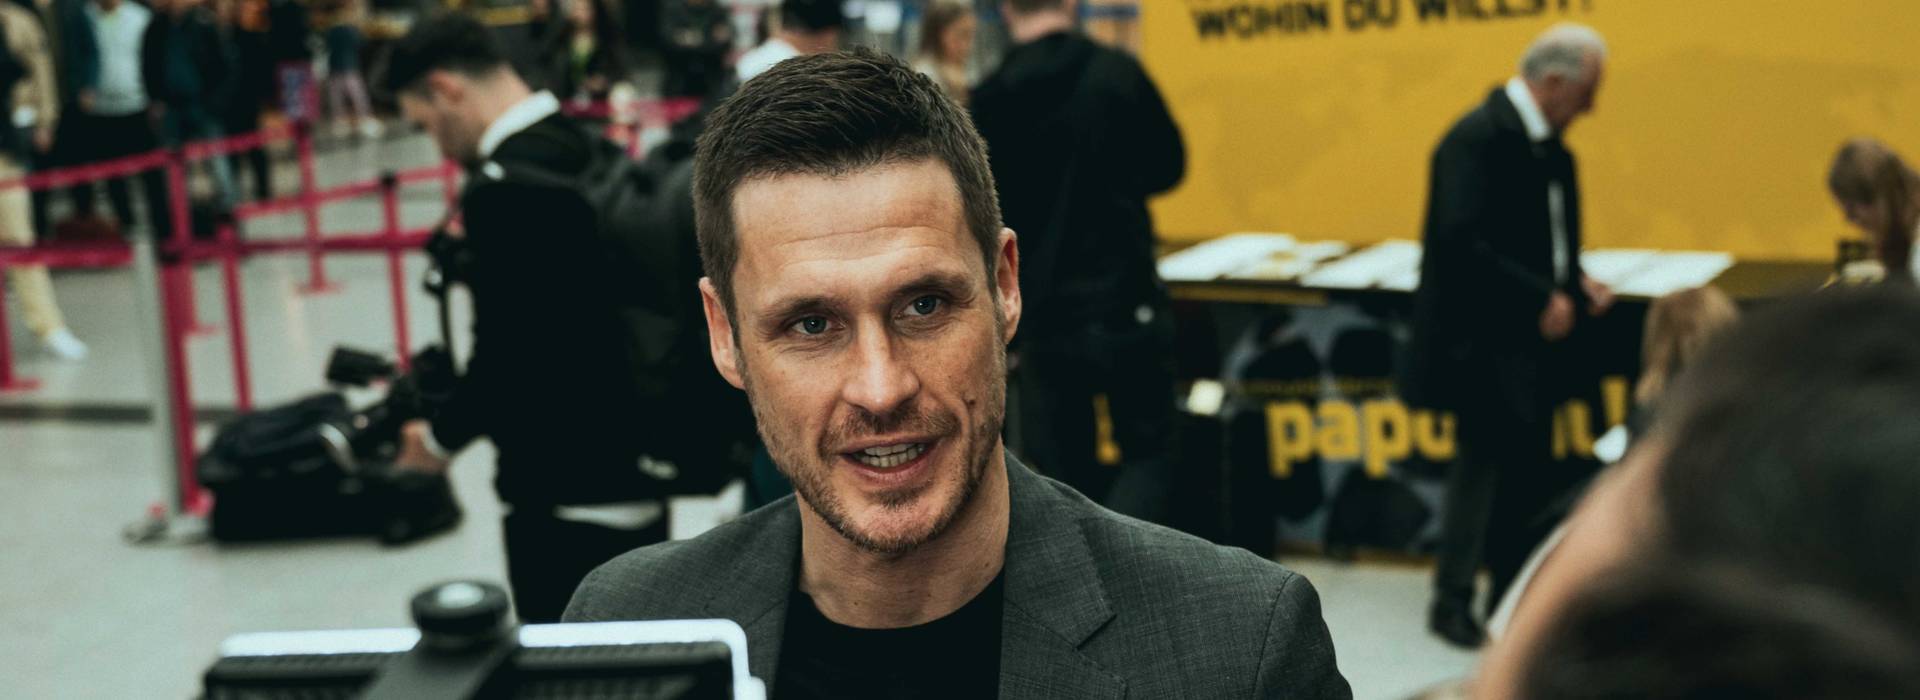 Sebastian Kehl on courage, anticipation and a certain nervousness 